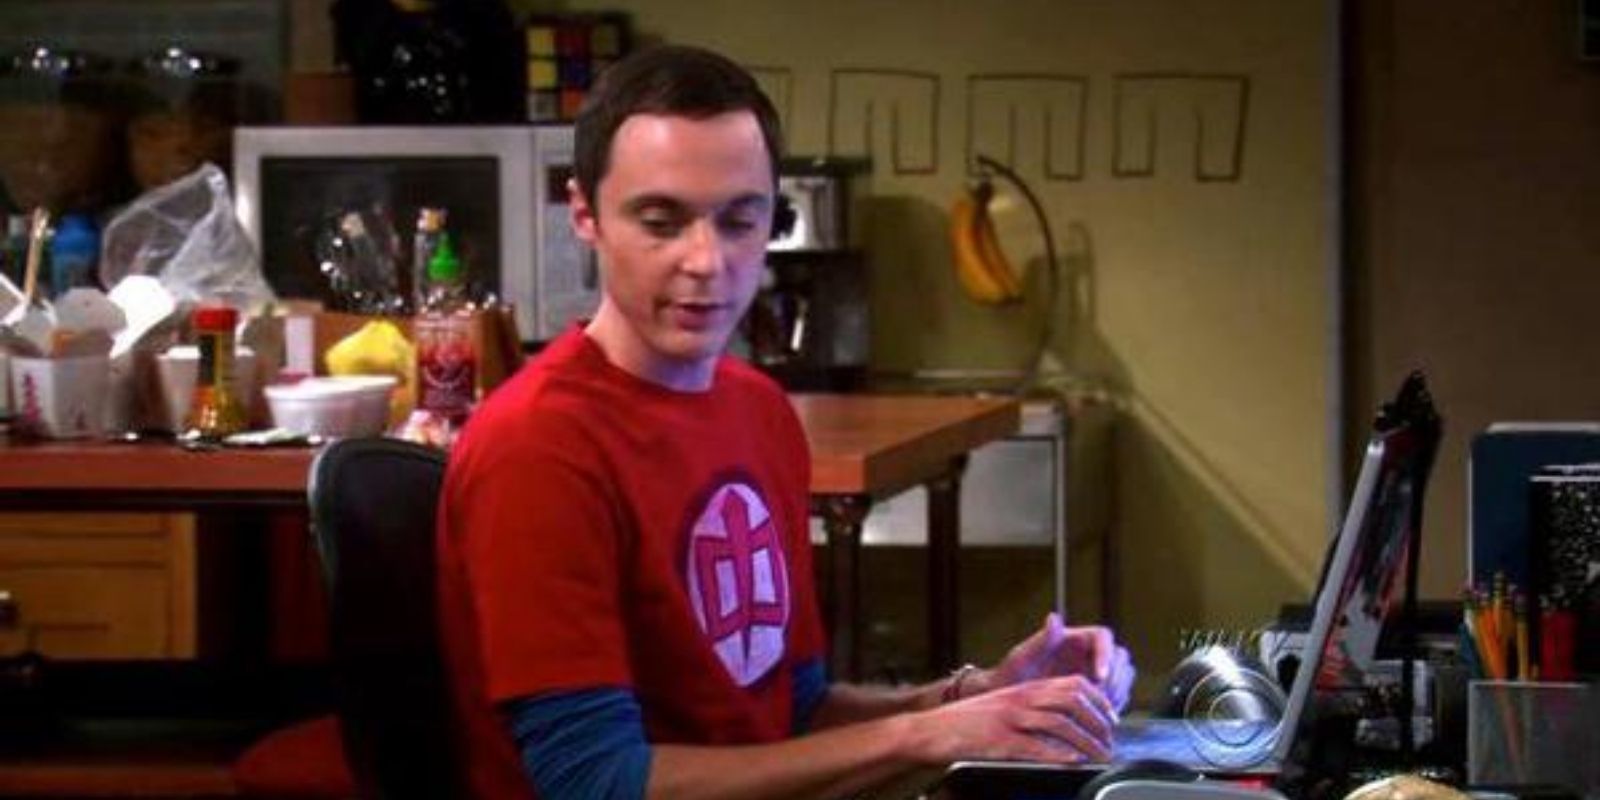 Sheldon Cooper wearing a red shirt with the logo of The Greatest American Hero in The Big Bang Theory